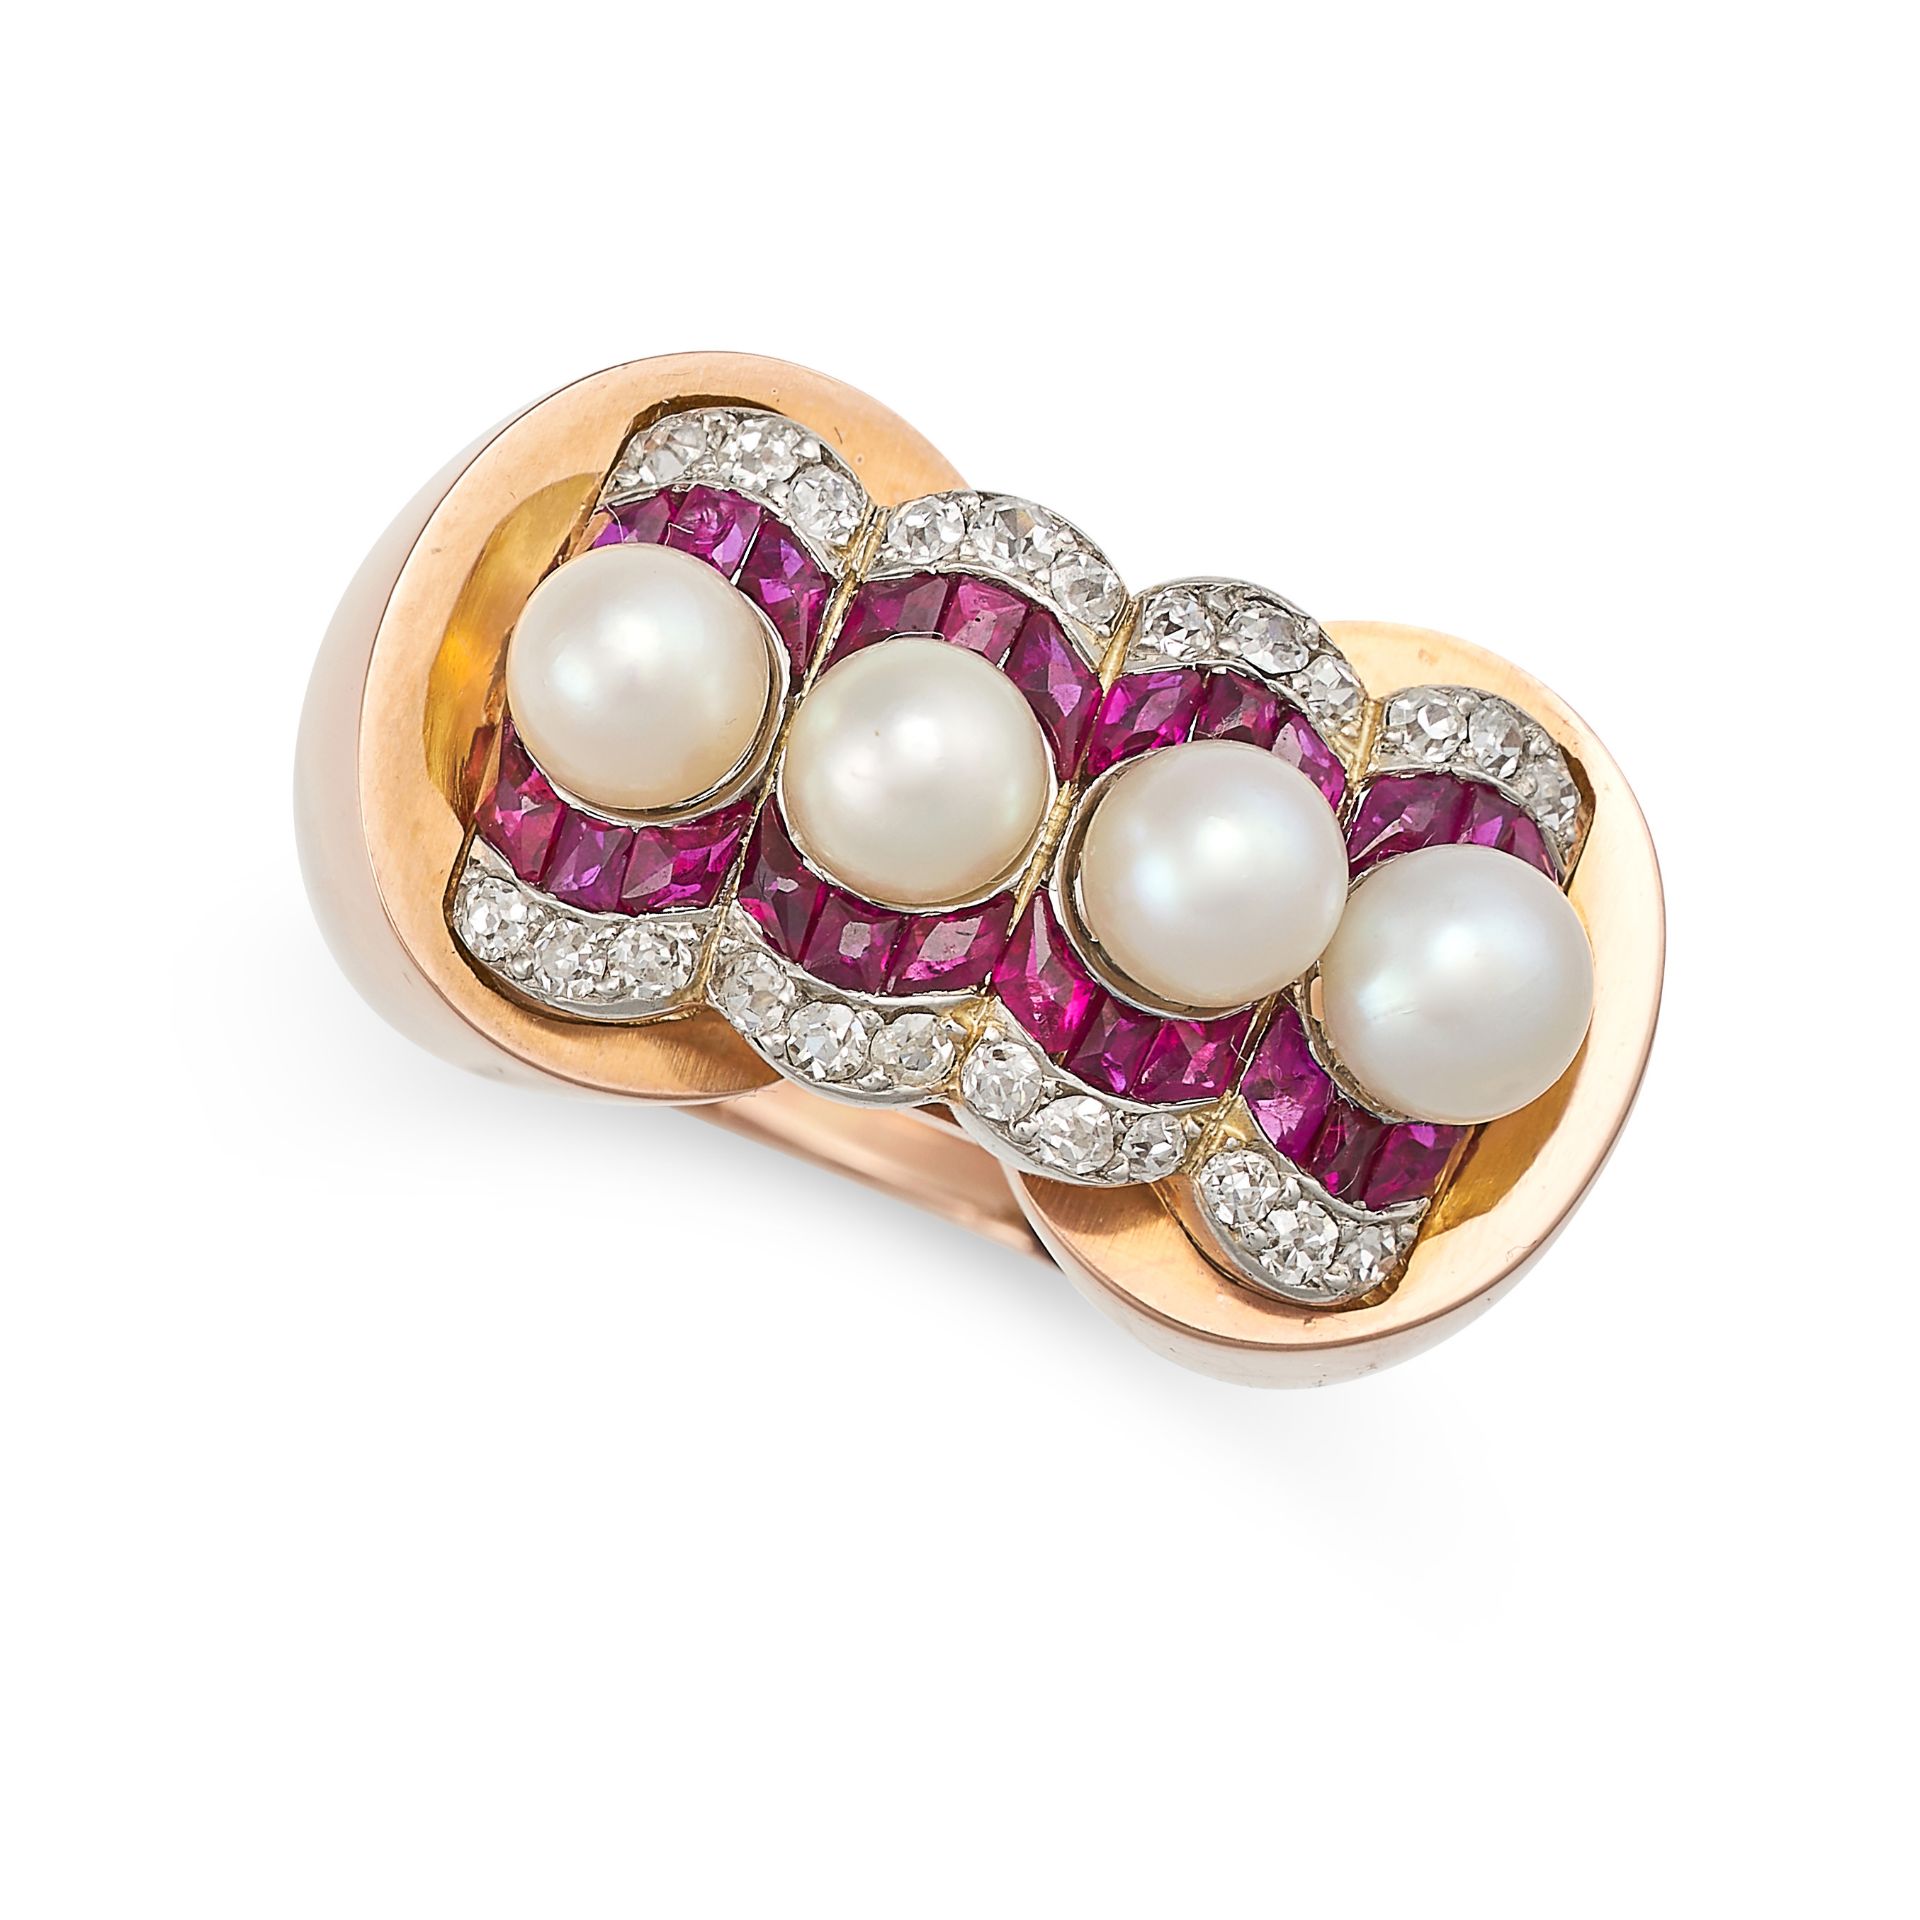 A RETRO PEARL, RUBY AND DIAMOND DRESS RING in rose and white gold, set with four pearls accented